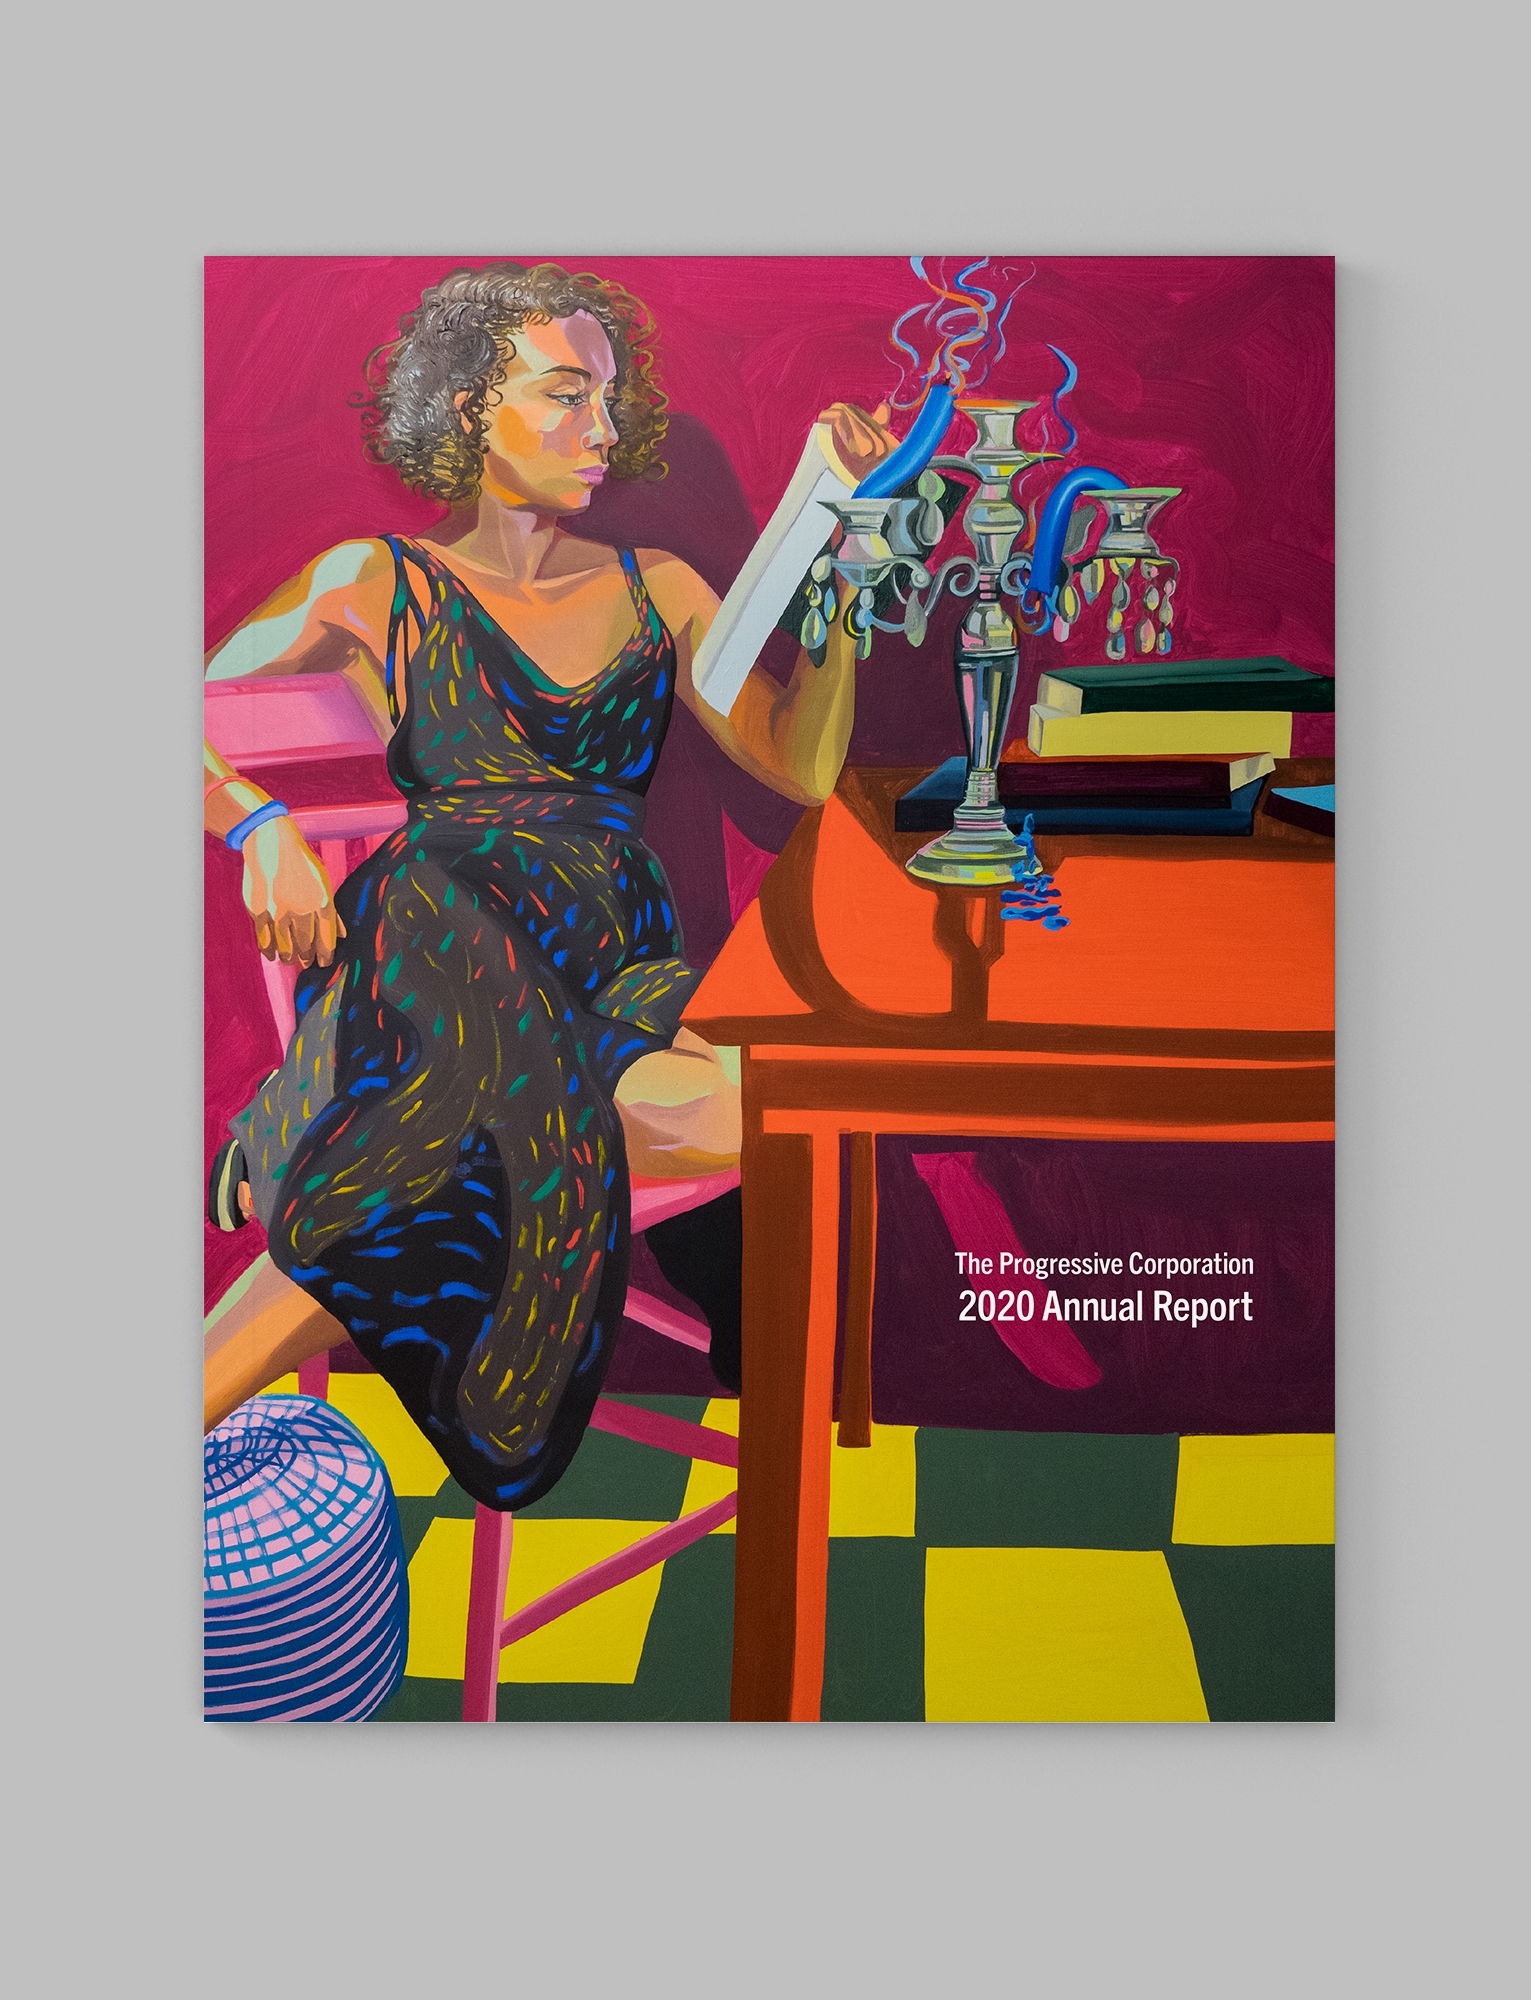 The Progressive Corporation Annual Report 2020 Cover, which features colorfully painted artwork by Aliza Nisenbaum of a woman in a dress reading at a table.